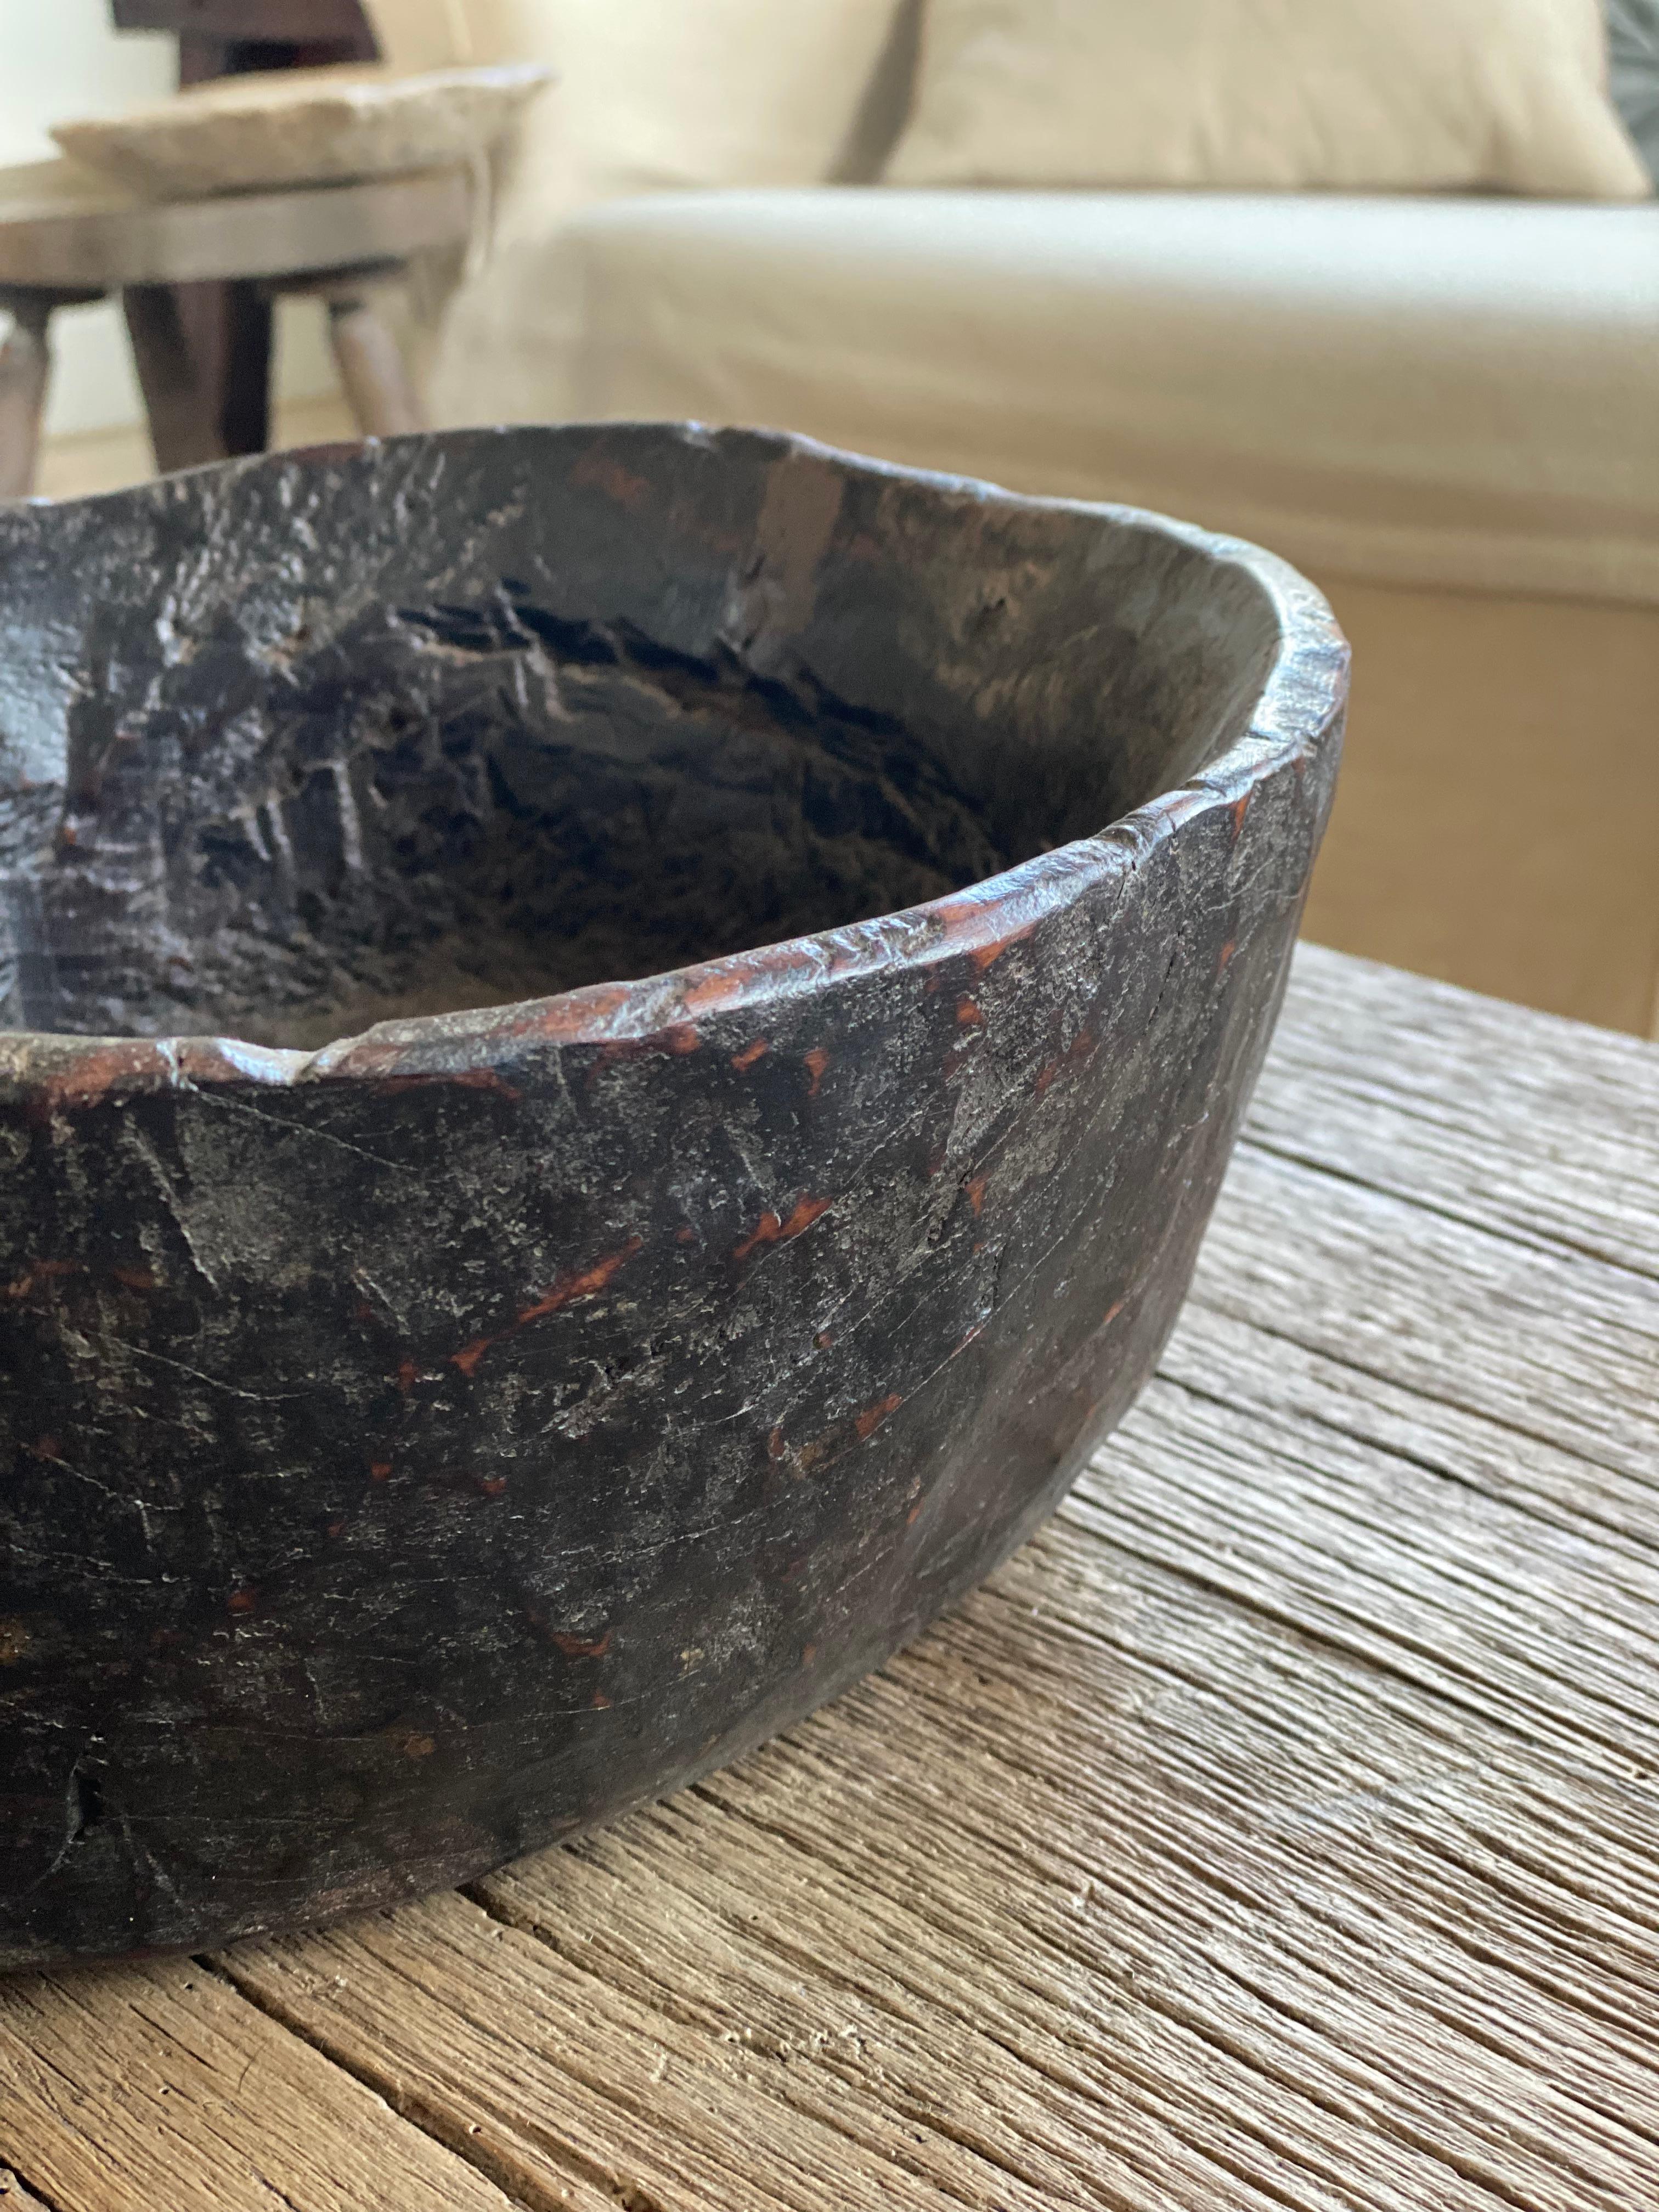 Sculpted large Walnut bowl in a dark ebonized finish.
At the bottom of the bowl is a wooden triangular insert, which may have originally been there or was later restored. In any case old and not recently made.
Charming beautiful piece with lots of